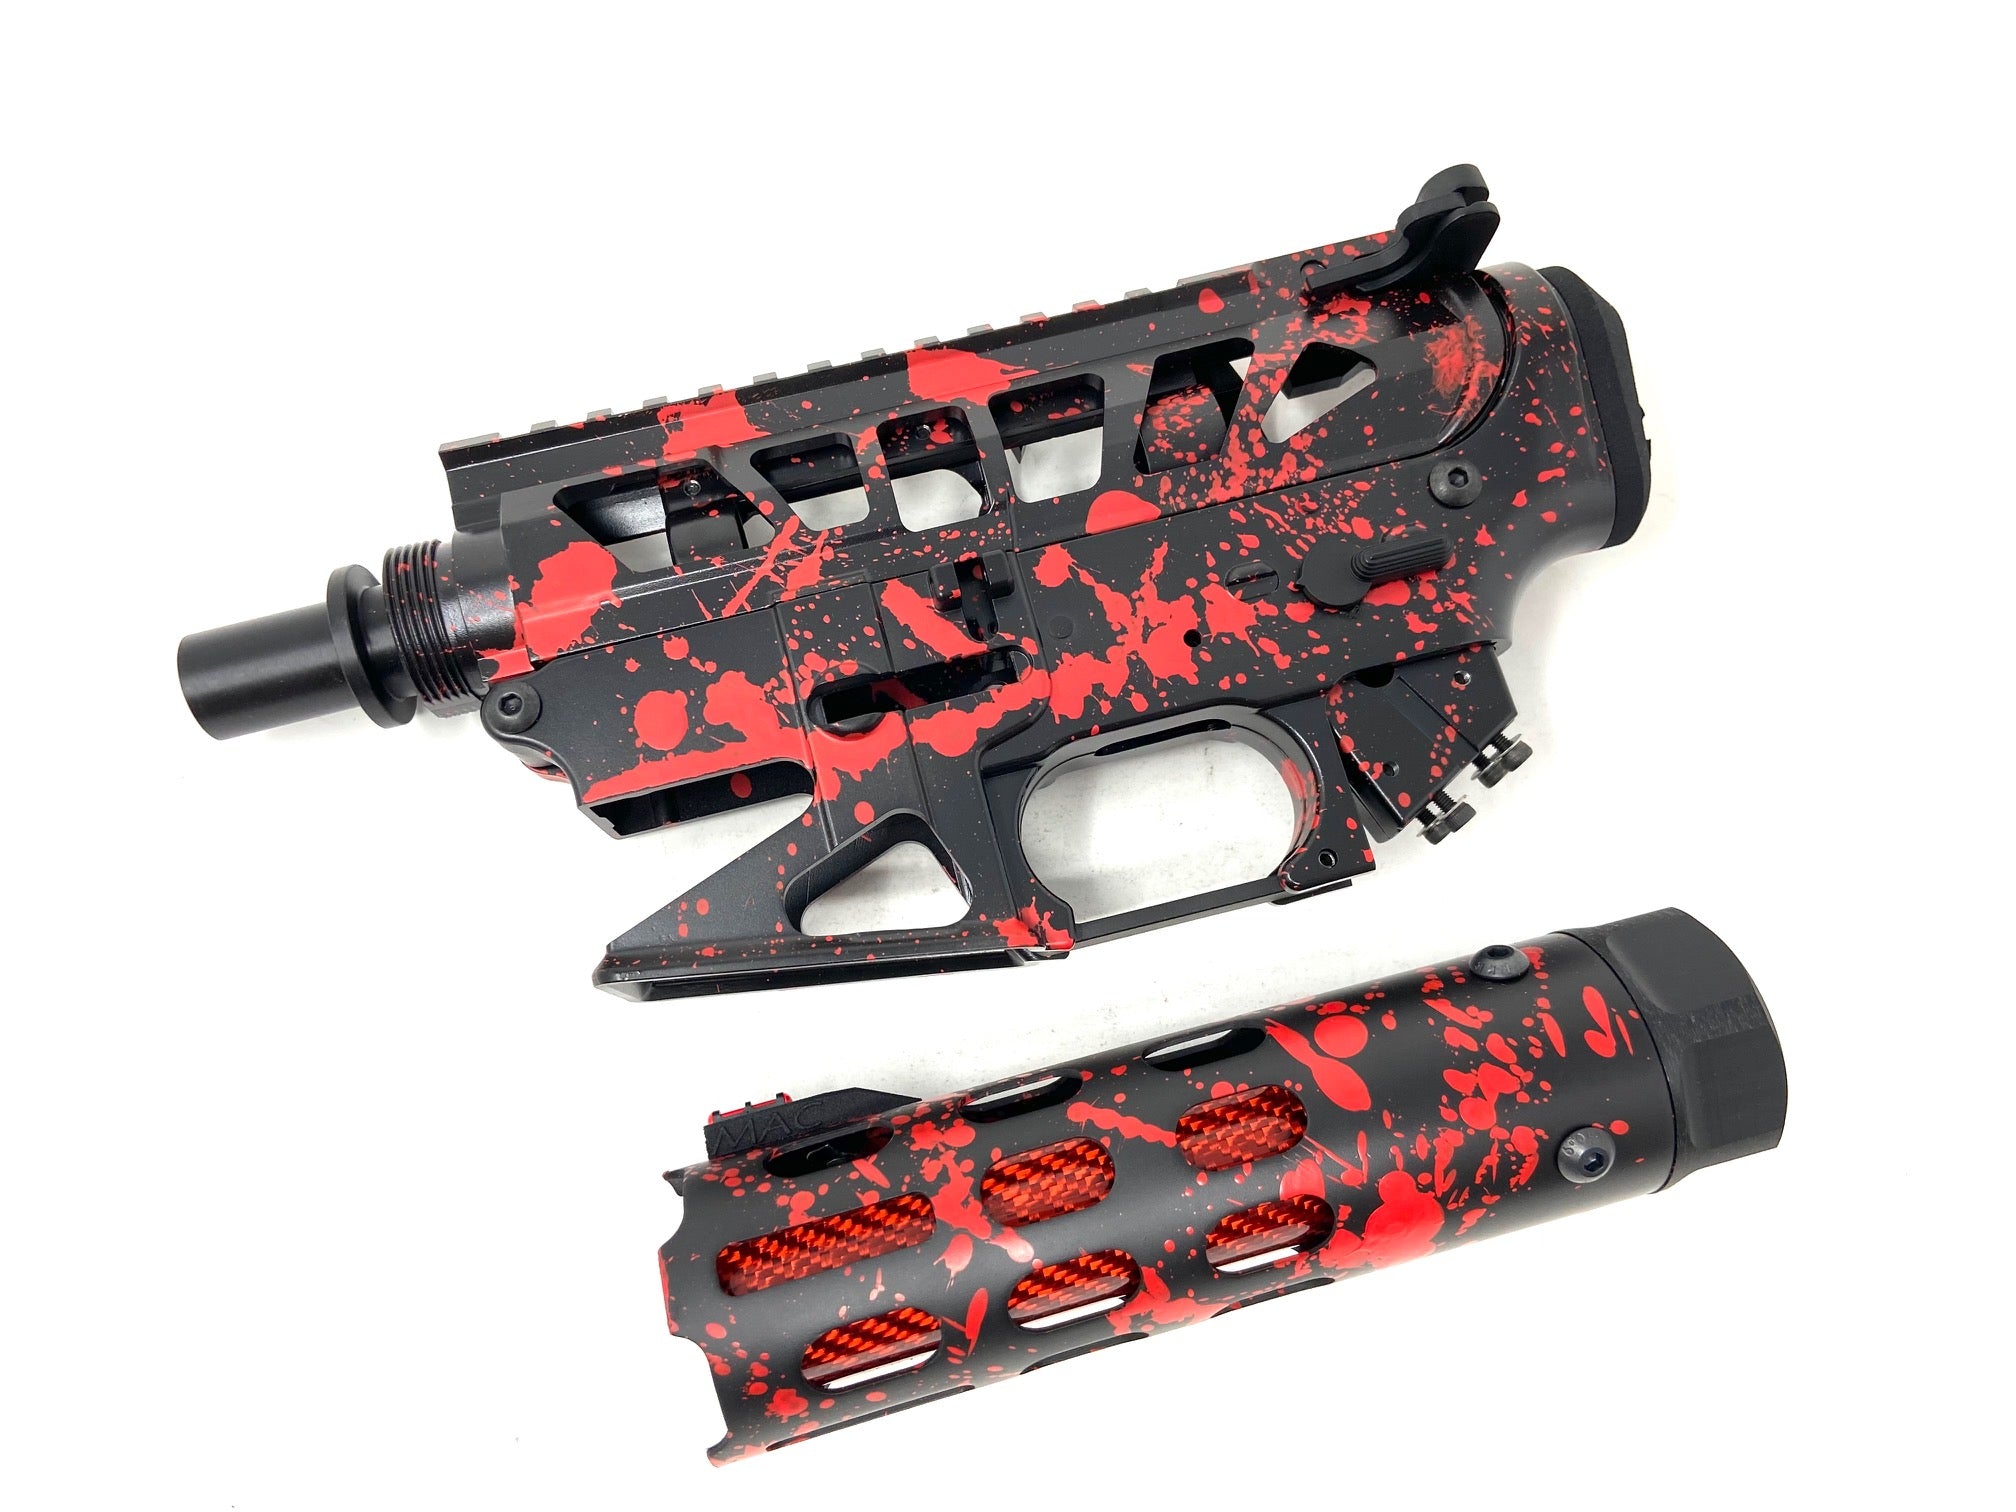 This setup is a SS Airsoft Exclusive from MAC Customs!  Get your one of a kind built external setup now!   Available in multiple colors! This package includes: MAC Custom cerakoted  Metal Body upper and lower  MAC Customs matching carbon fiber Handguard with front sight  MAC Custom Carbon Fiber Pom outer barrel with threads and cover for small tracer  MAC Custom Cerakoted matching gearbox  MAC Custom Receiver End cap    Perfect for your next HPA or AEG build!  Get yours today only at SS Airsoft!!